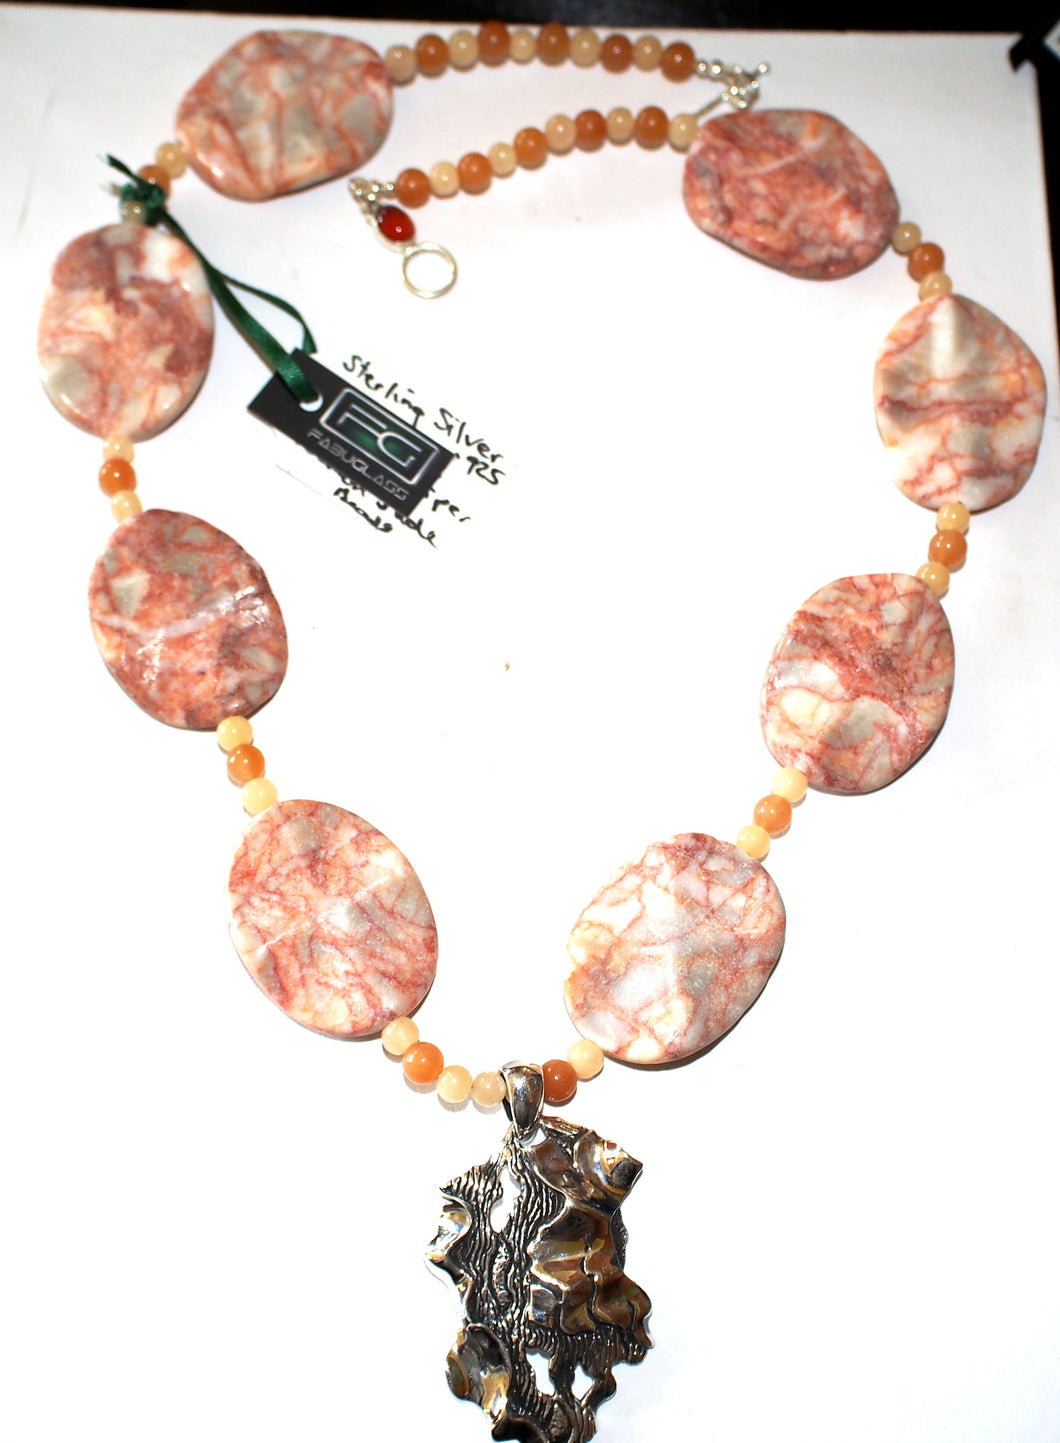 Red Picasso Agate & Lemon Jade Bead Necklace by Jan Rietdyk